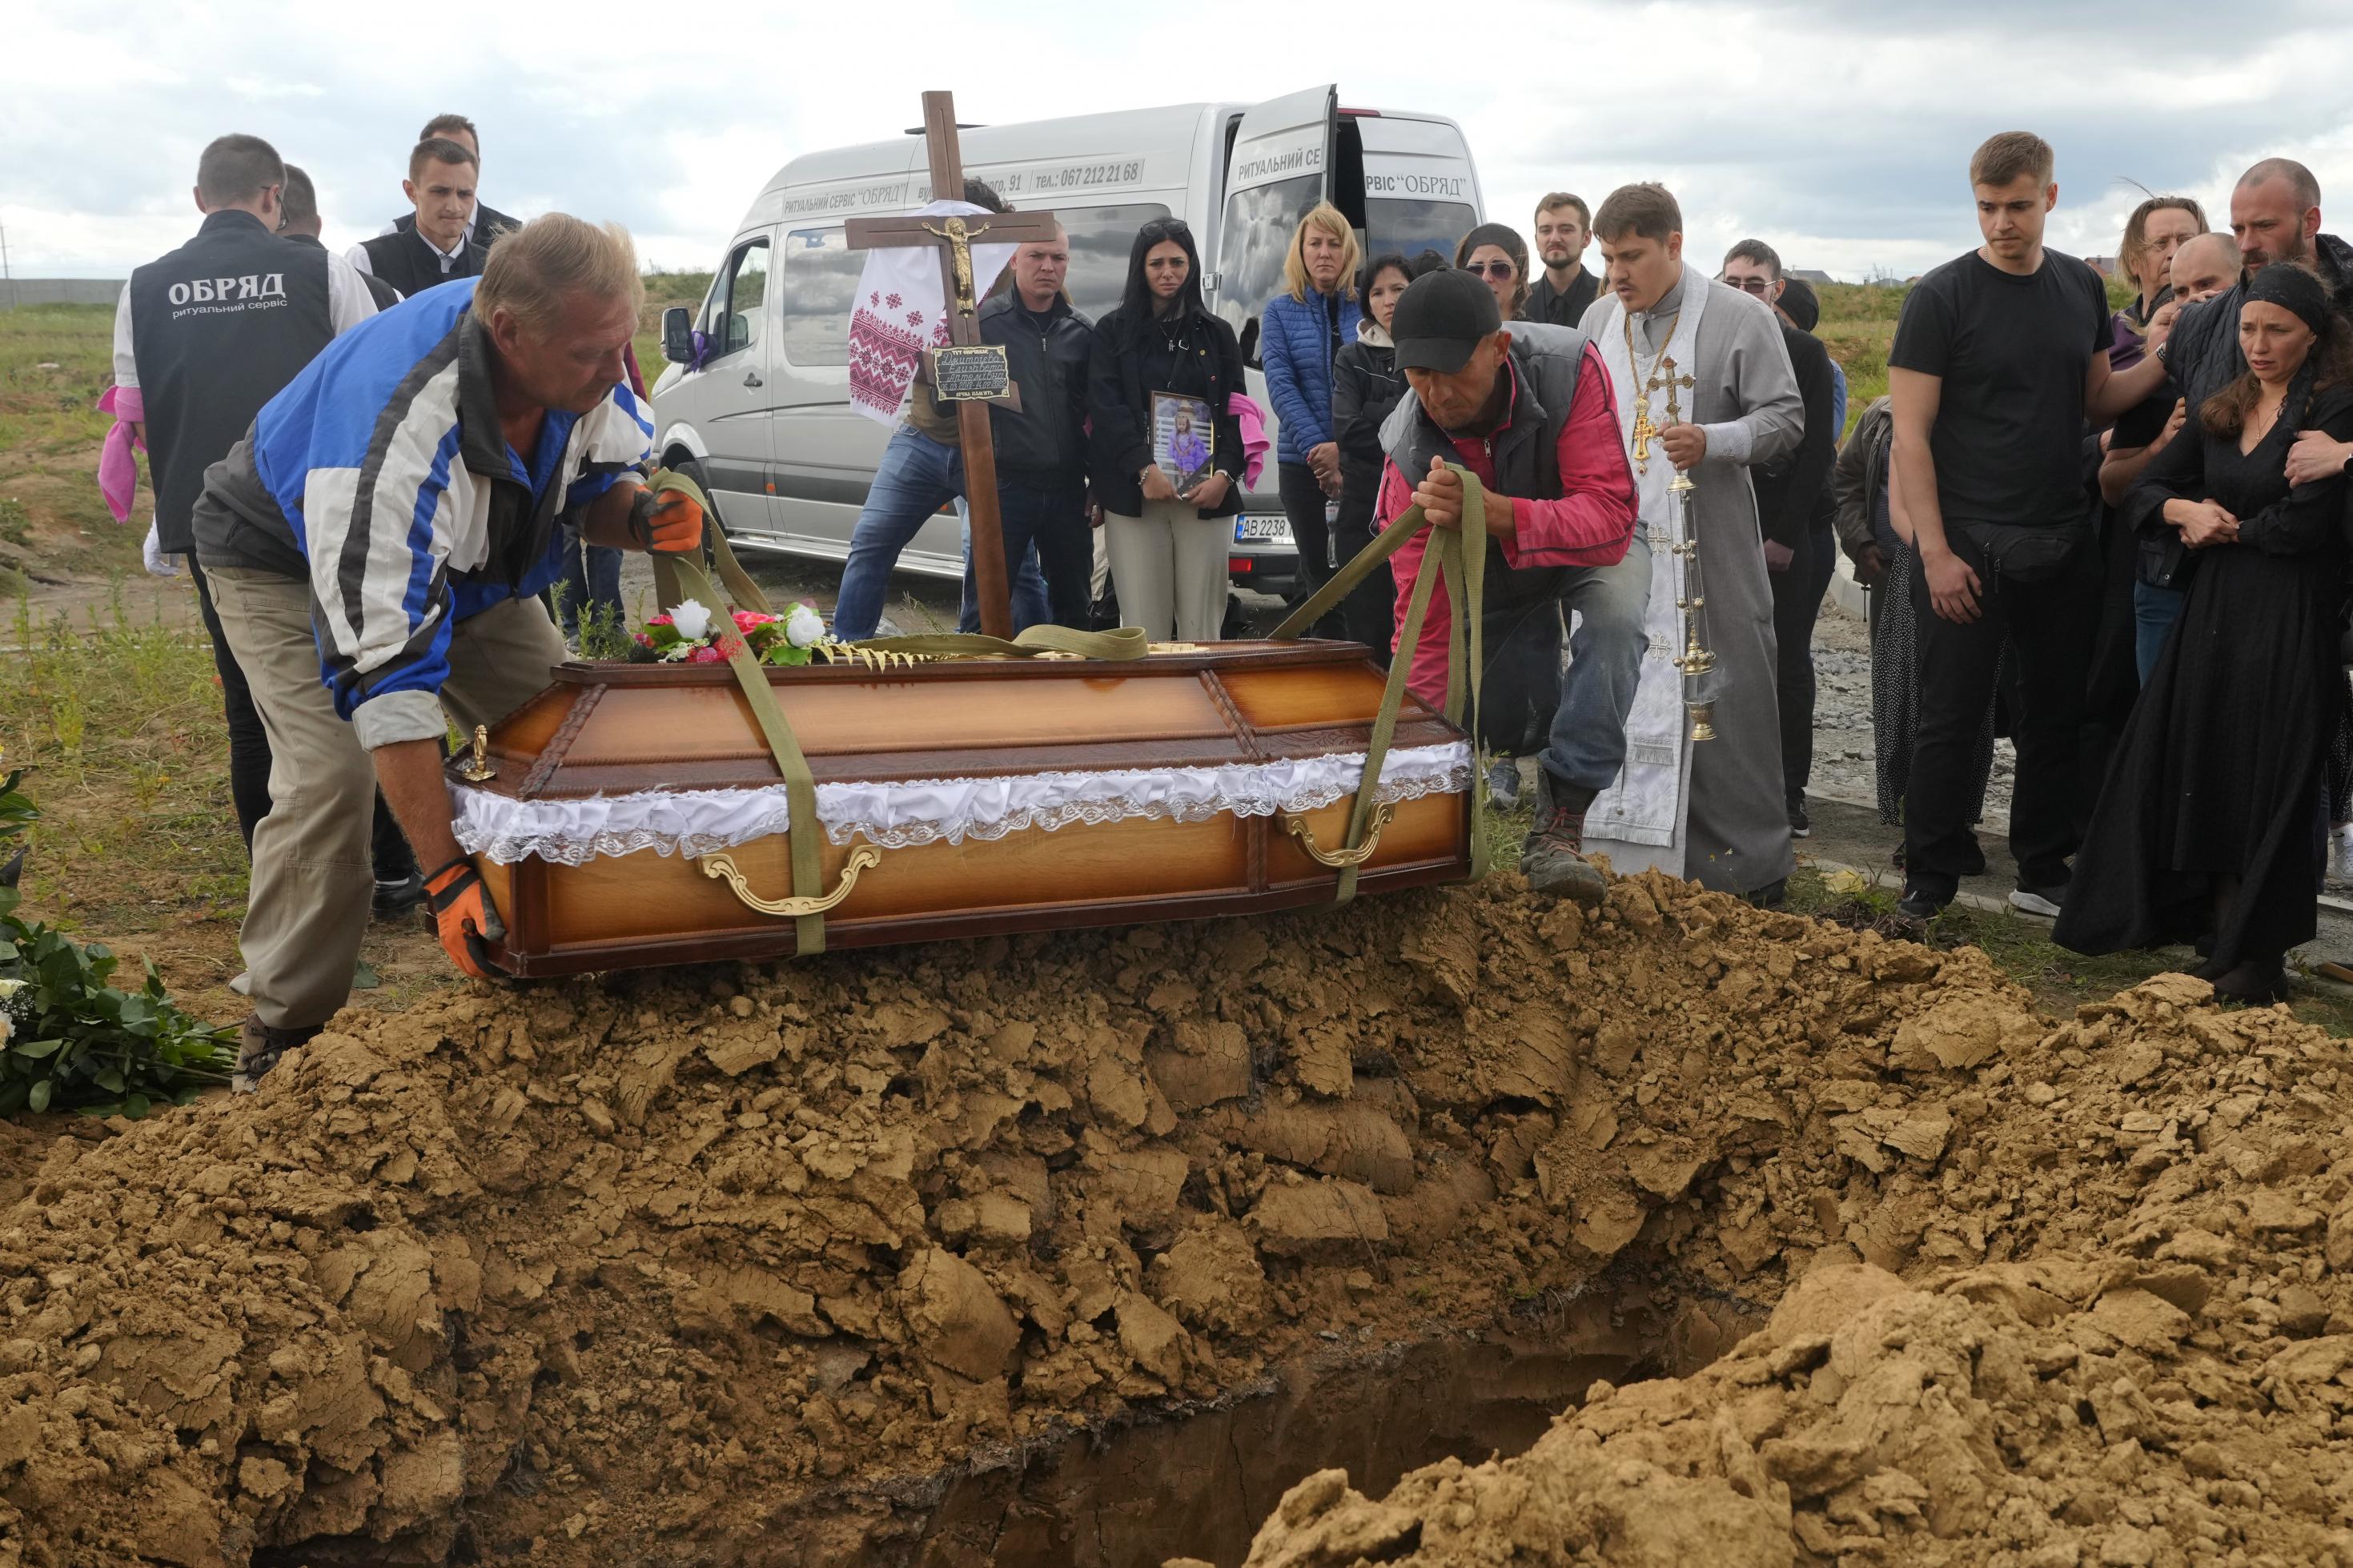 Men lower the coffin of Liza, 4-year-old girl killed by Russian attack, during a funeral ceremony in Vinnytsia, Ukraine, Sunday, July 17, 2022. Wearing a blue denim jacket with flowers, Liza was among 23 people killed, including two boys aged 7 and 8, in Thursday's missile strike in Vinnytsia. Her mother, Iryna Dmytrieva, was among the scores injured. (AP Photo/Efrem Lukatsky)